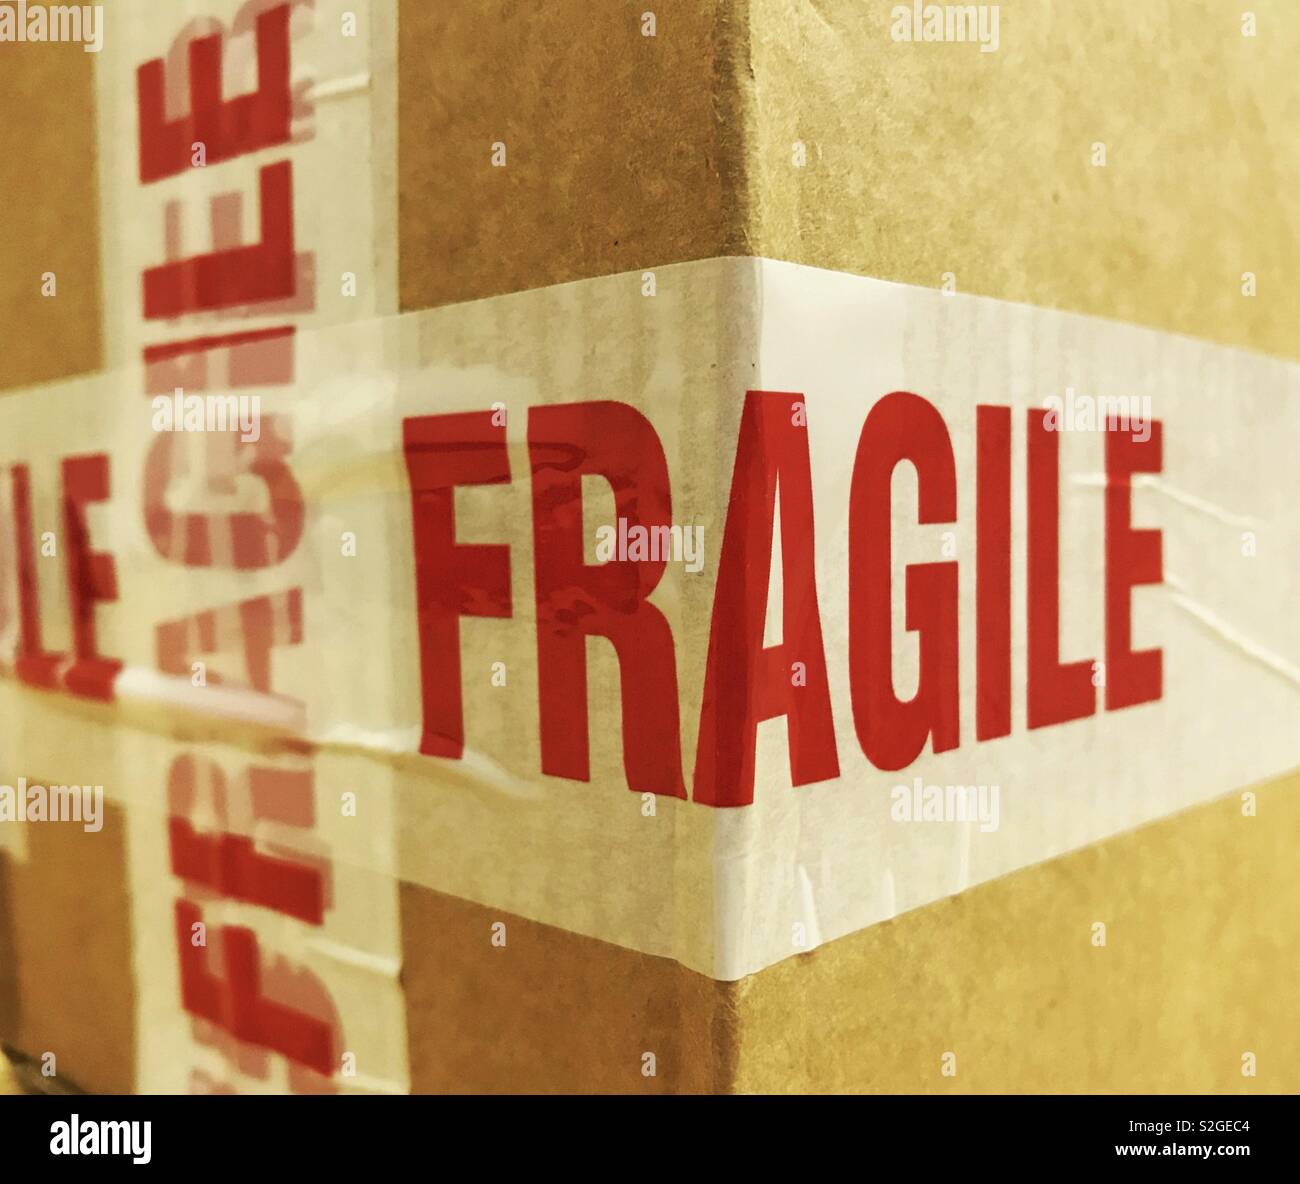 Cardboard delivery box marked “Fragile” Stock Photo